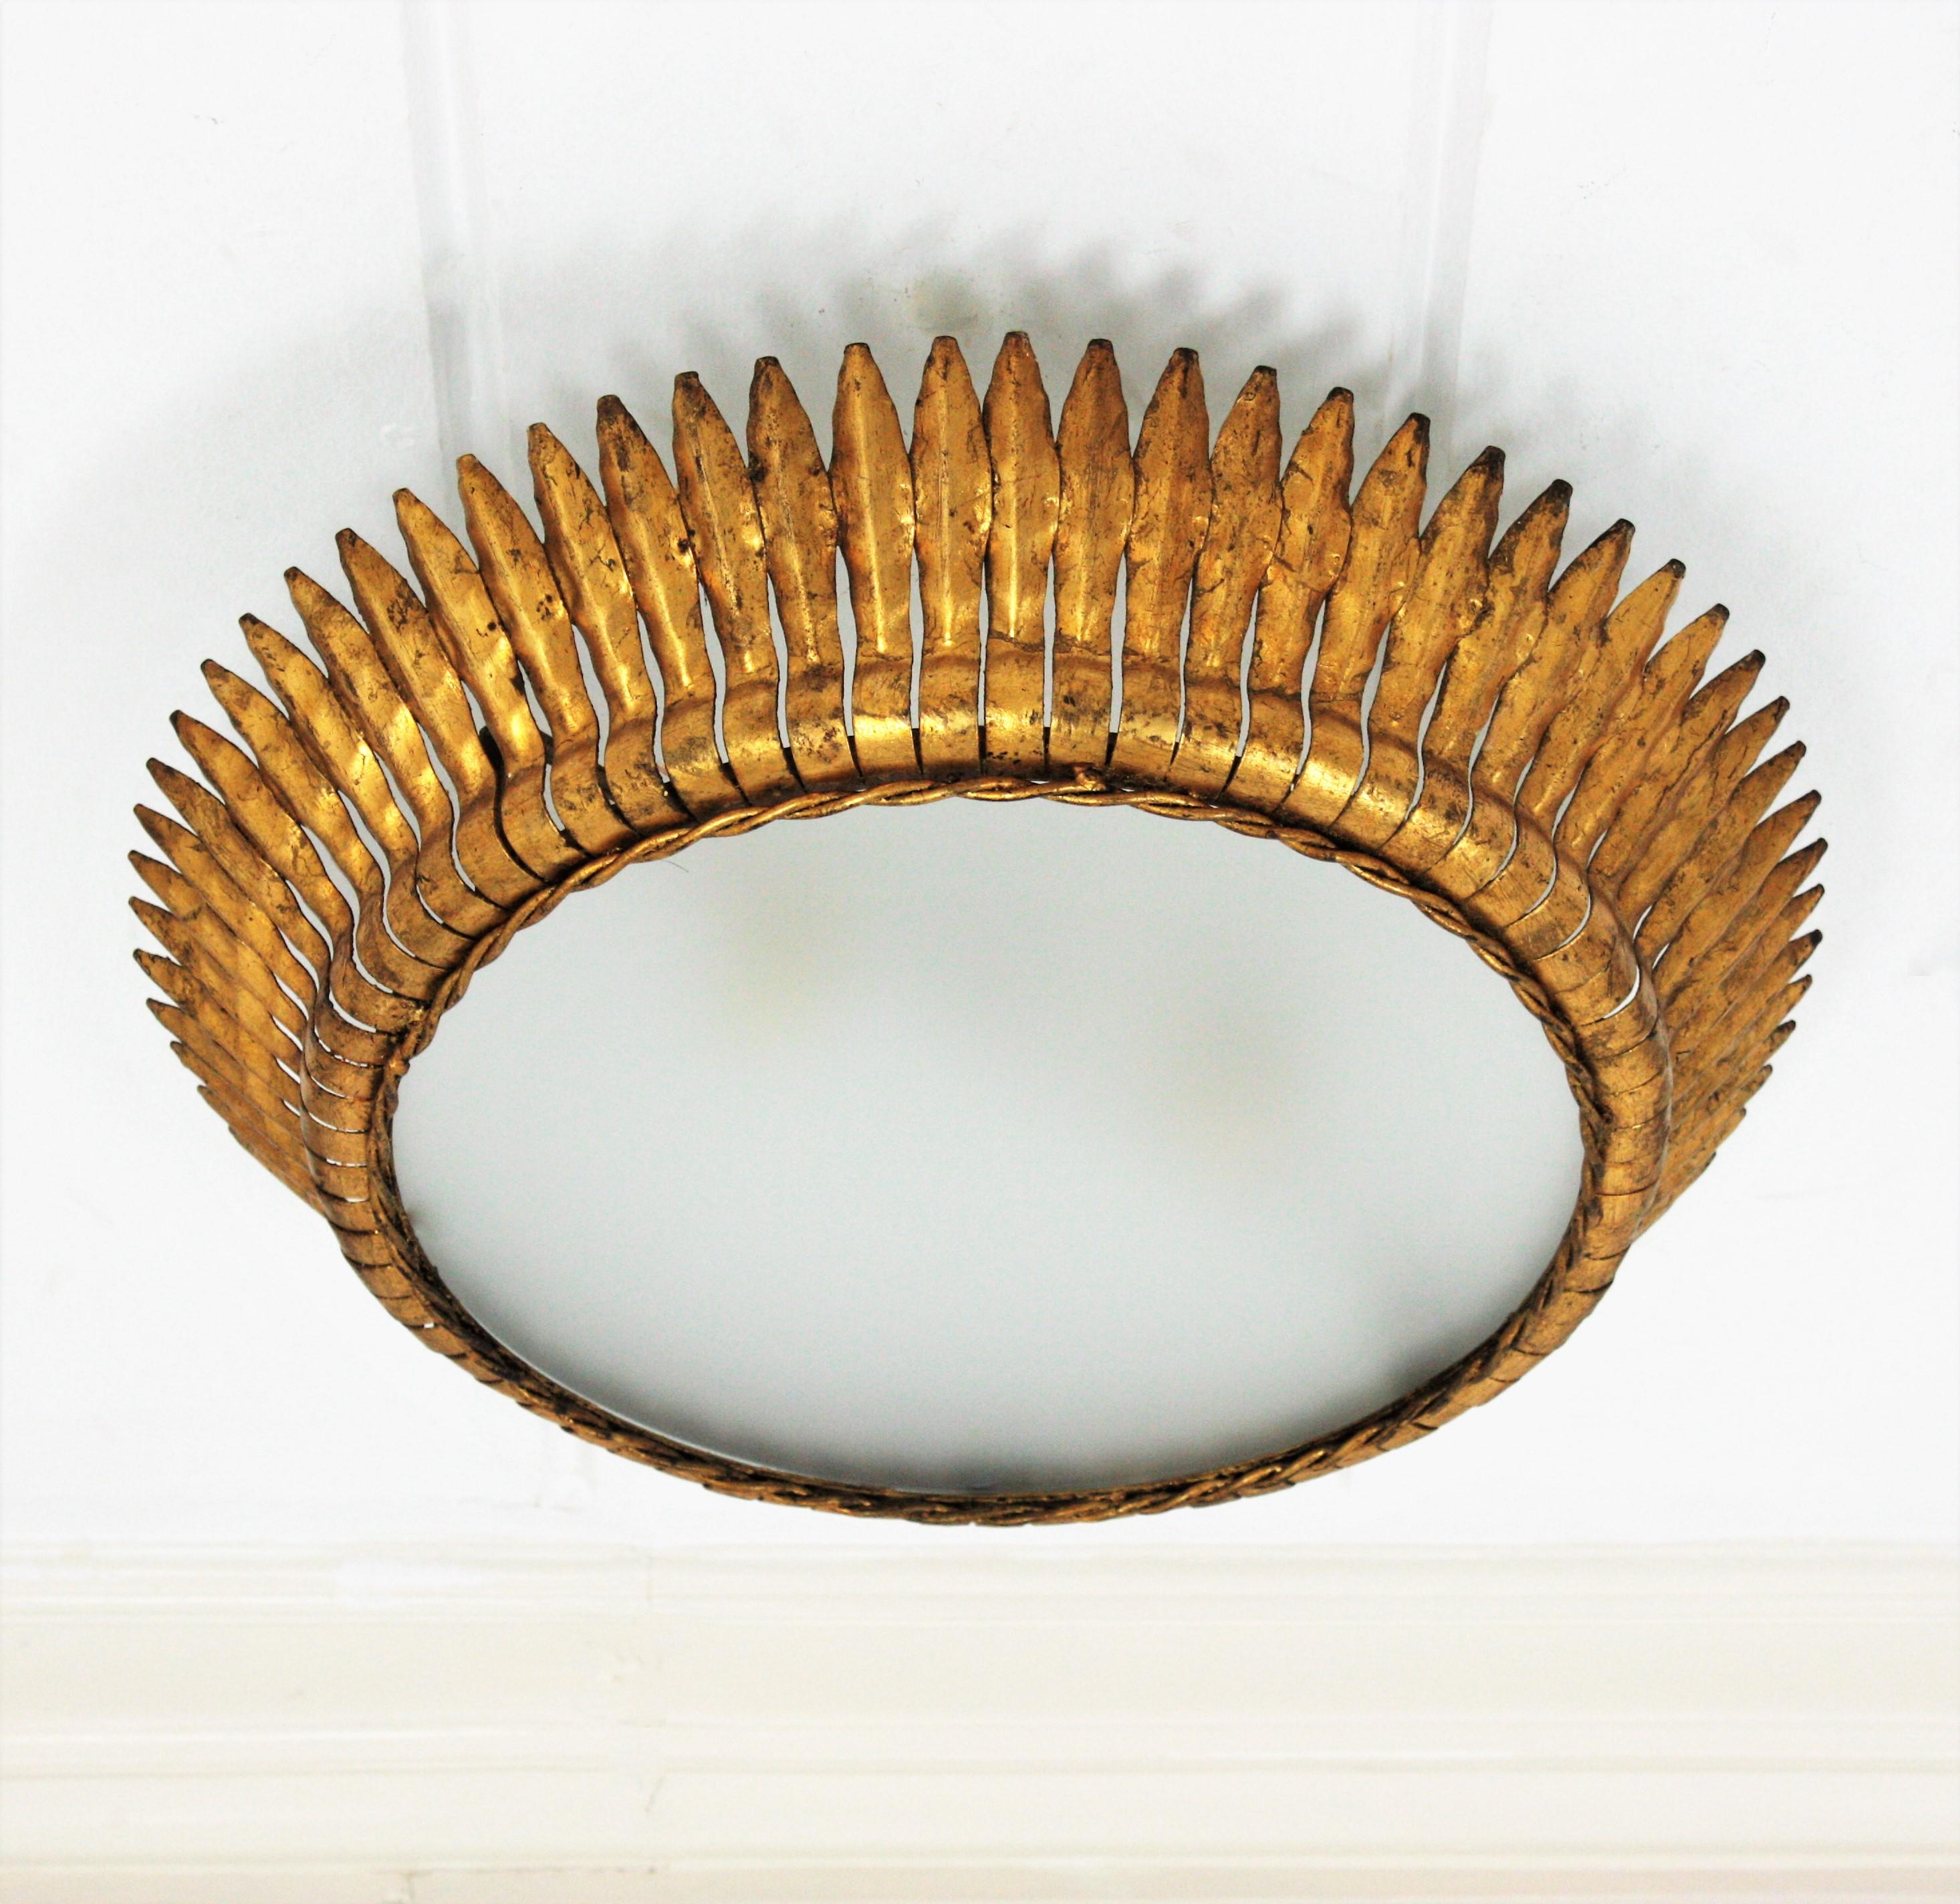 20th Century Large Spanish Gilt Metal Crown Sunburst Leafed Light Fixture with Frosted Glass